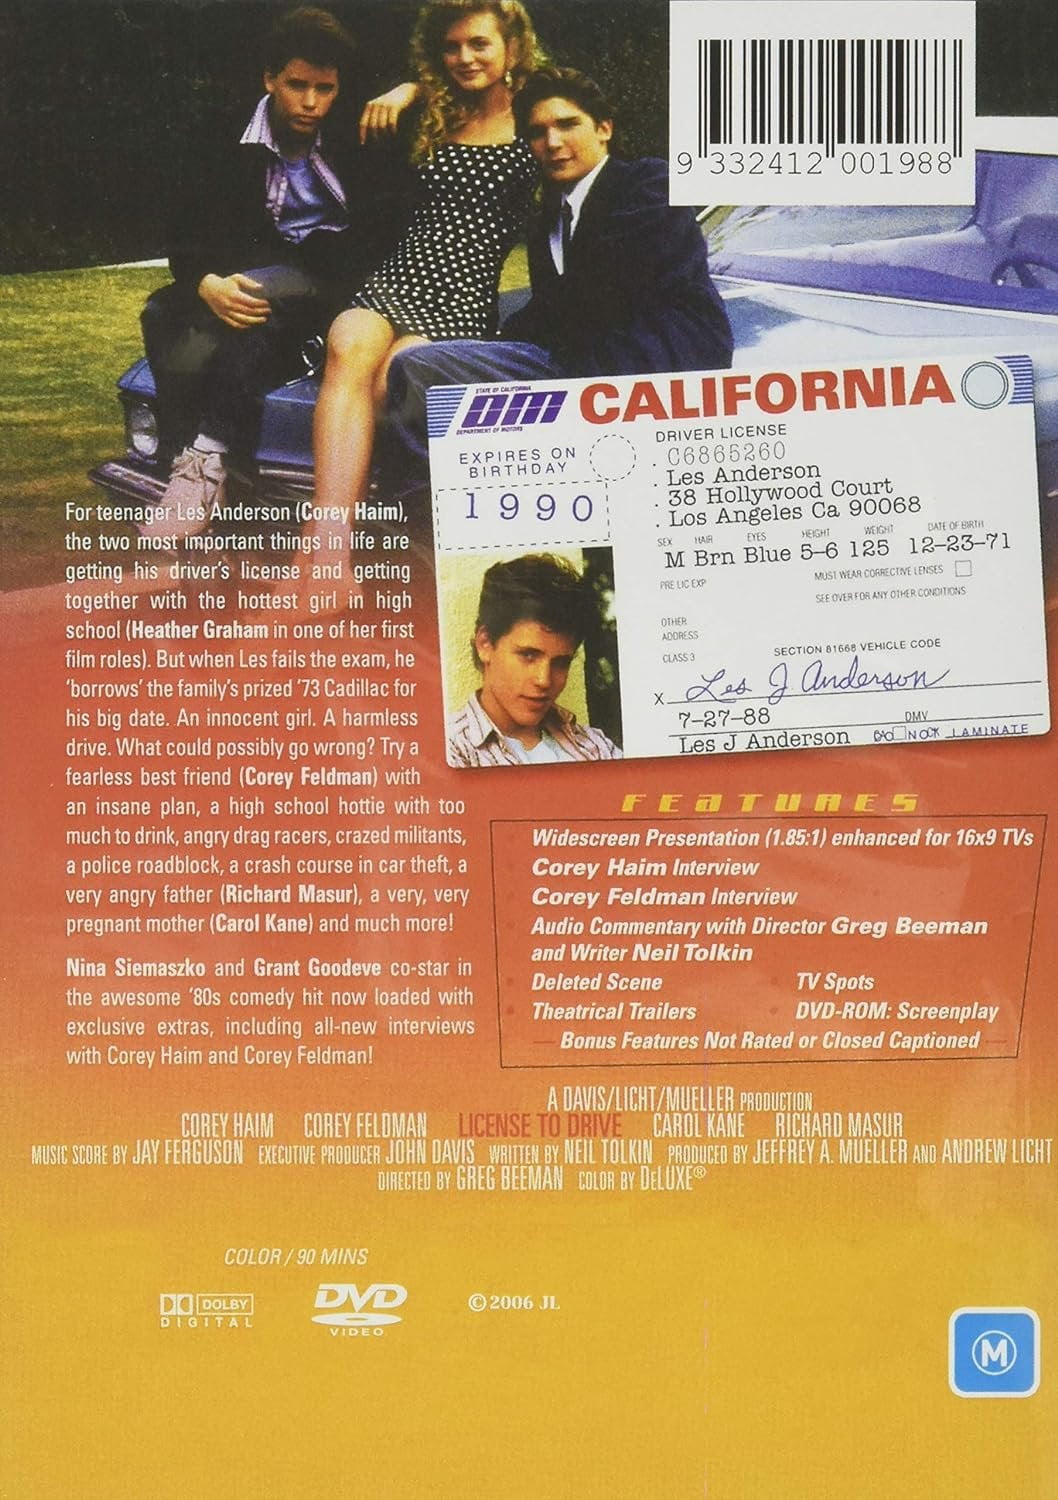 License to Drive (DVD)